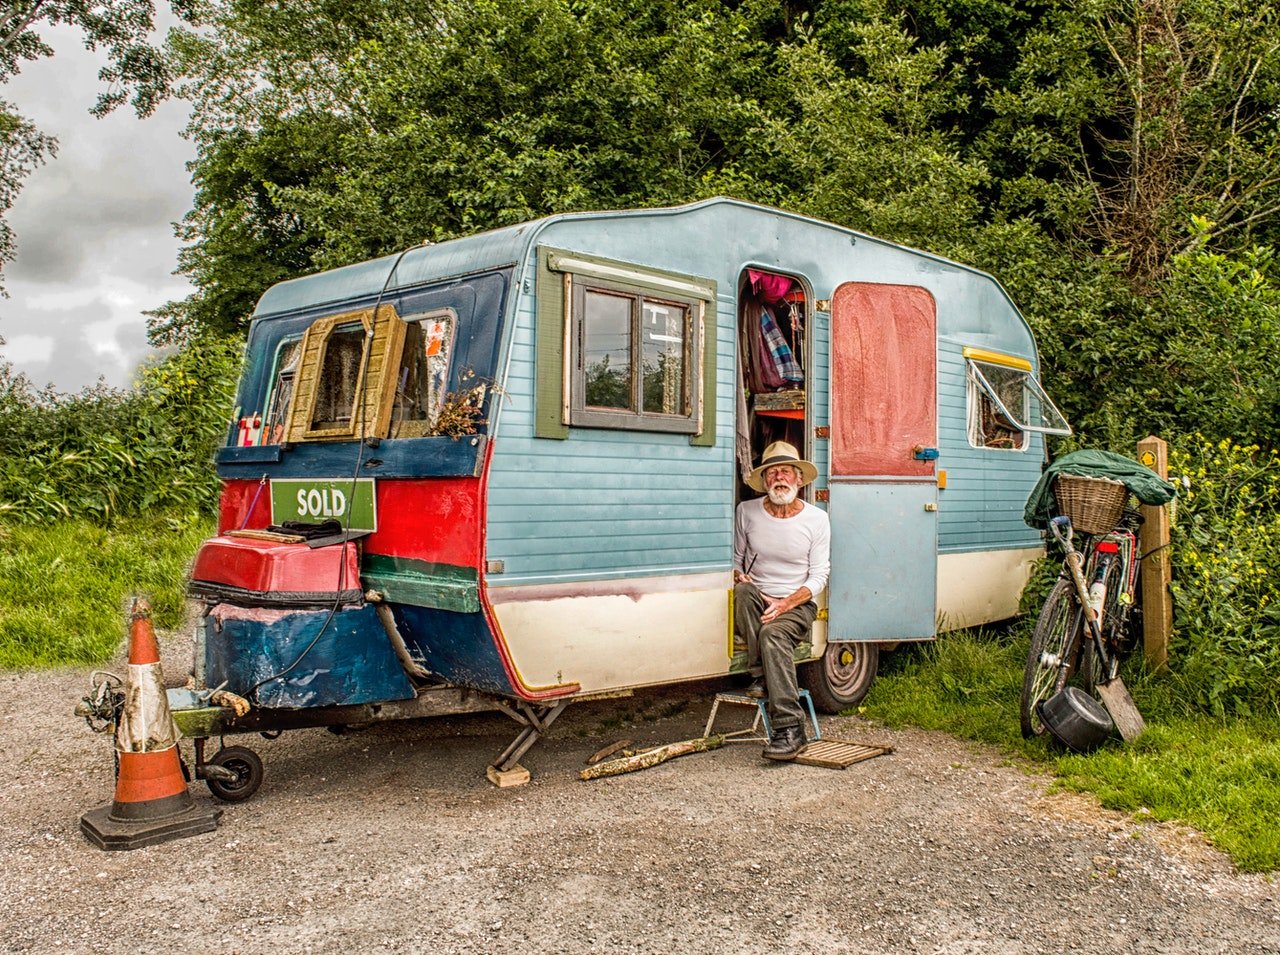 OP's great uncle lived in a dirty trailer | Source: Pexels